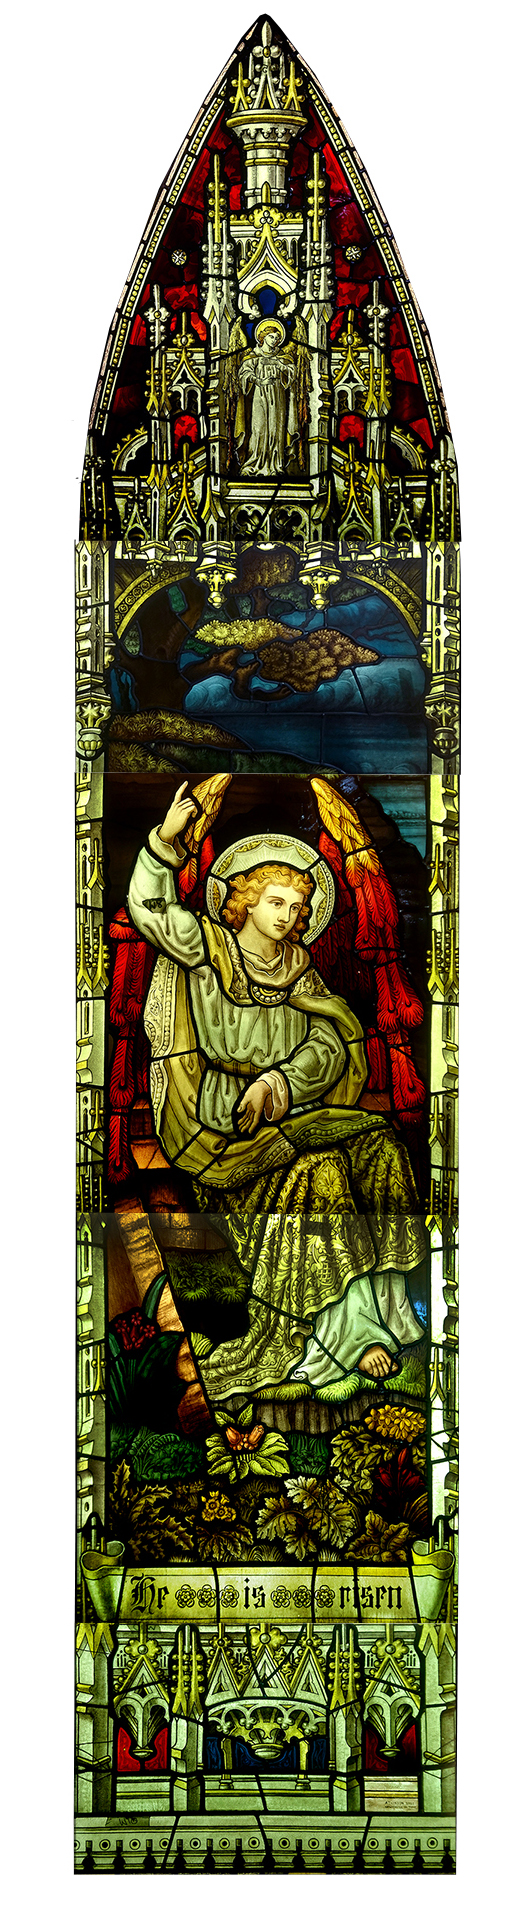 Private: Antique Stained Glass Window Depicting An Angel